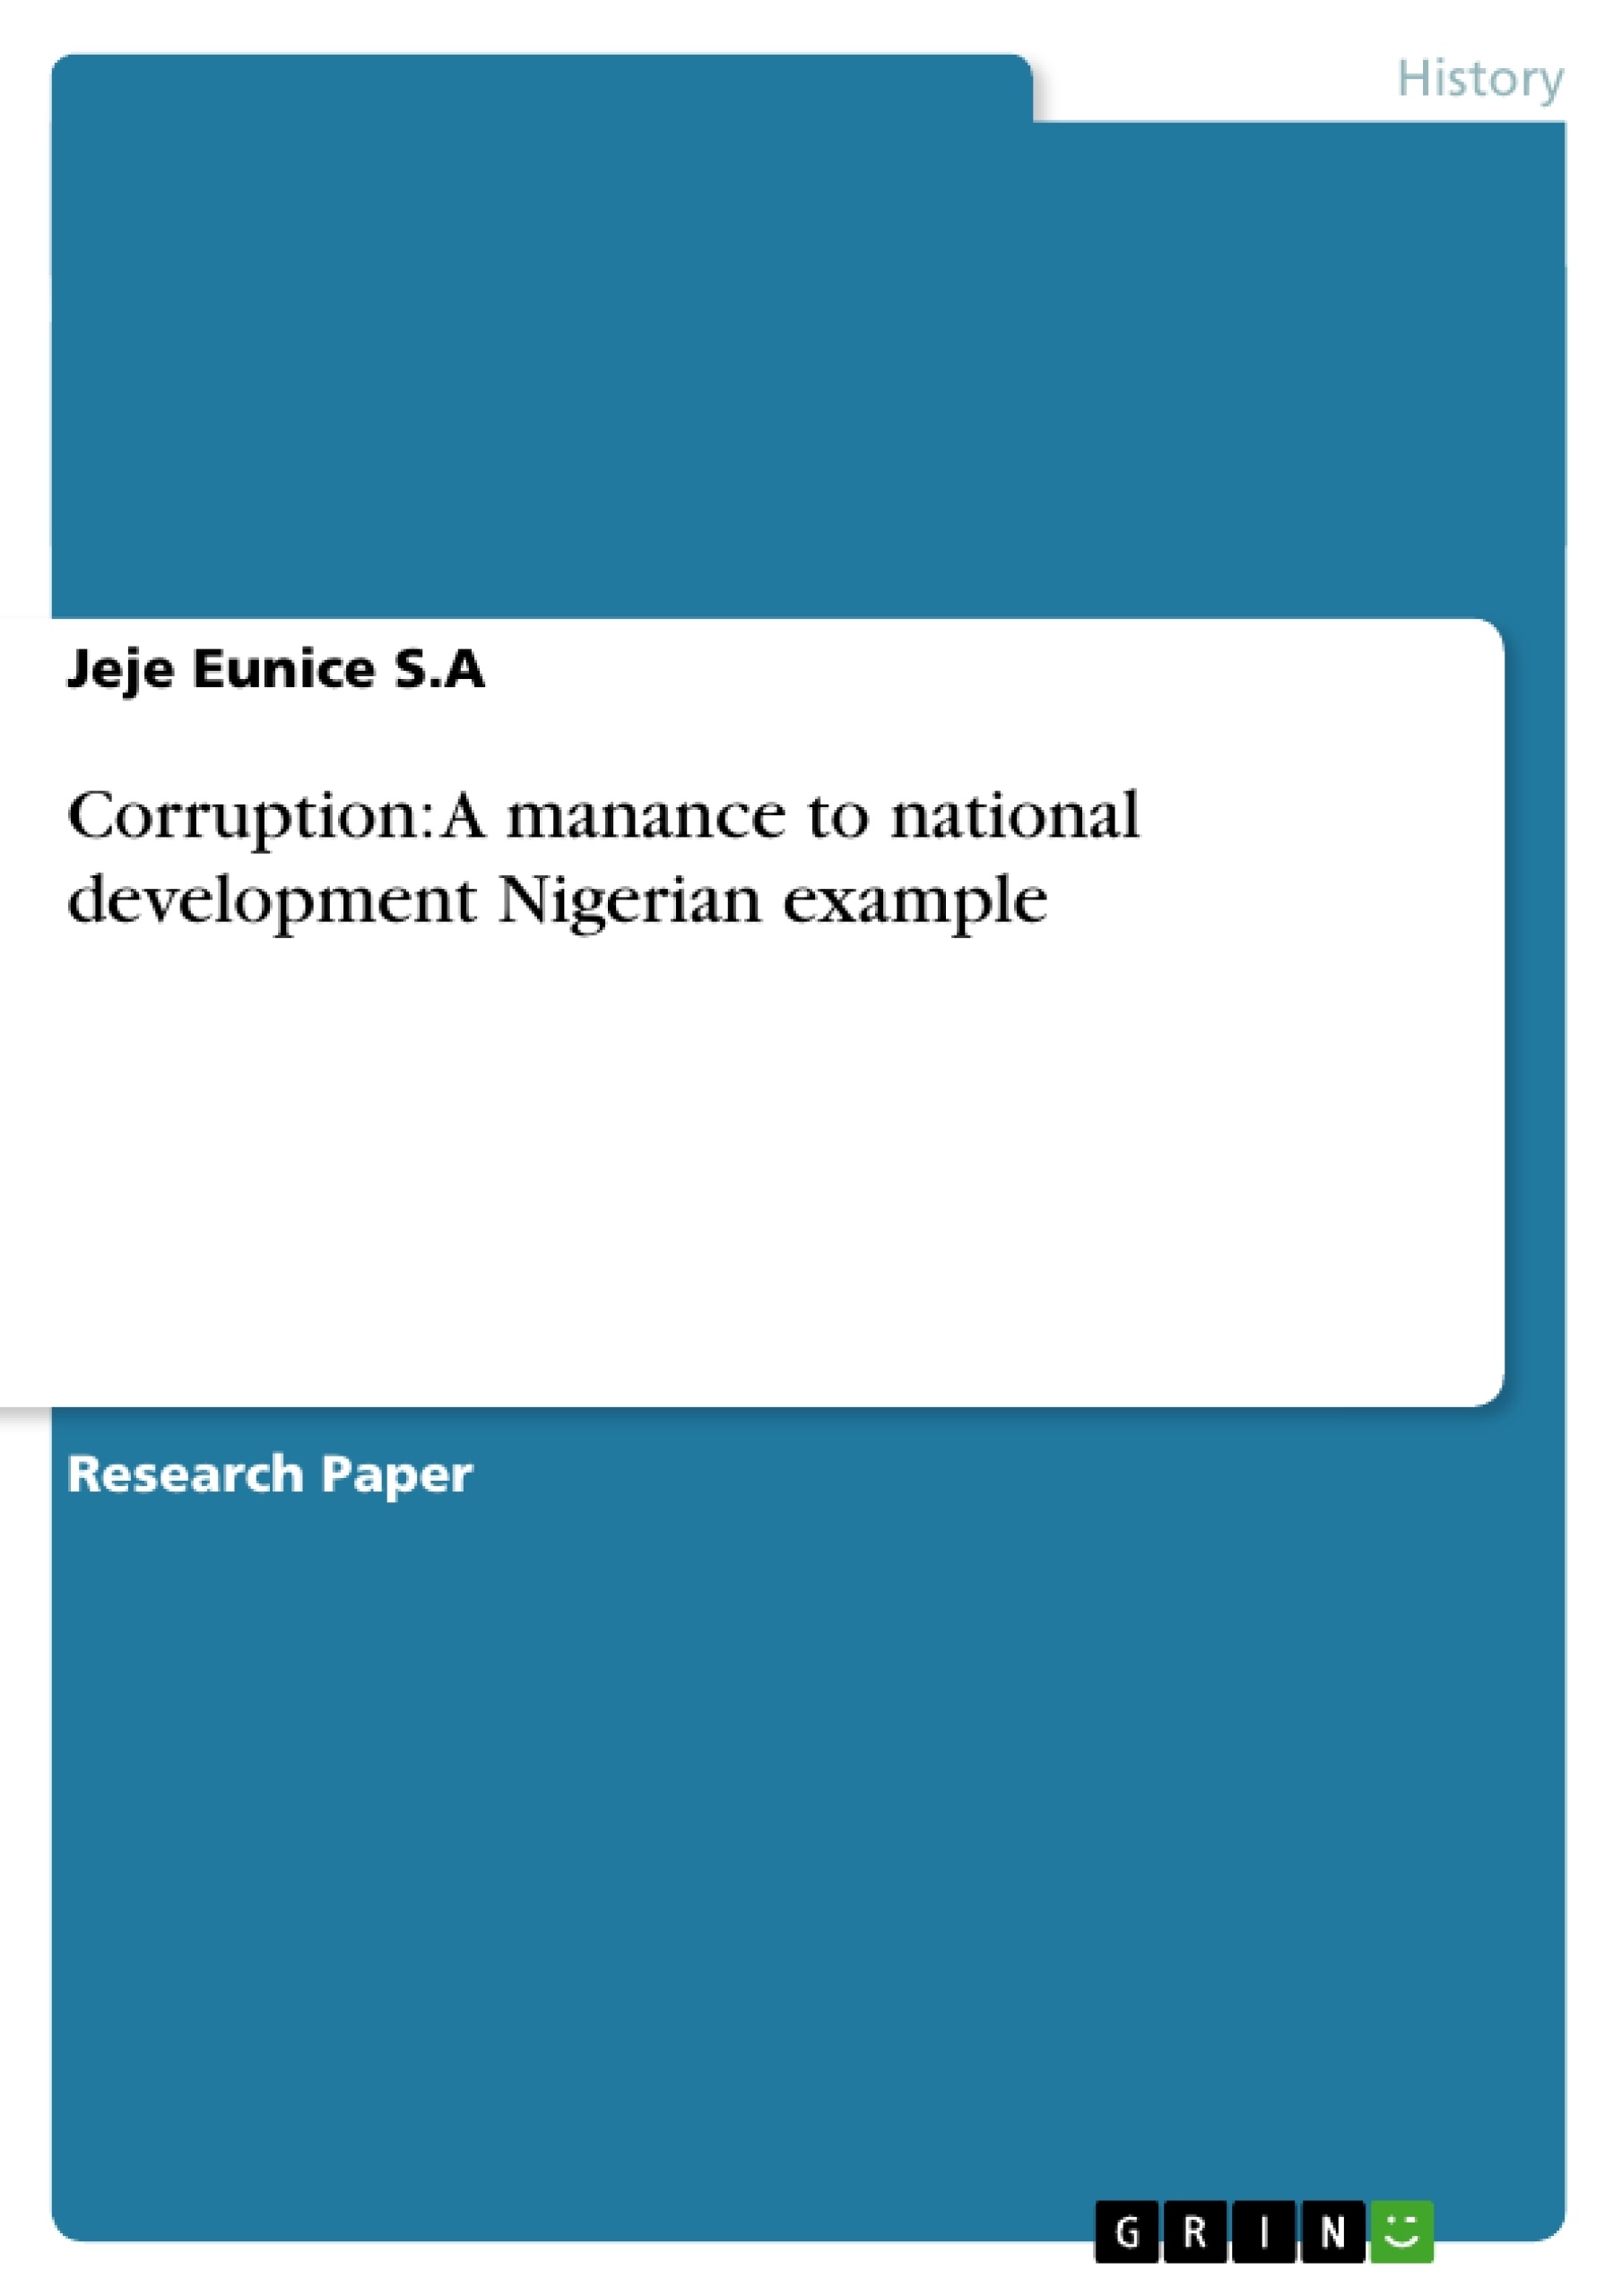 Title: Corruption: A manance to national development Nigerian example